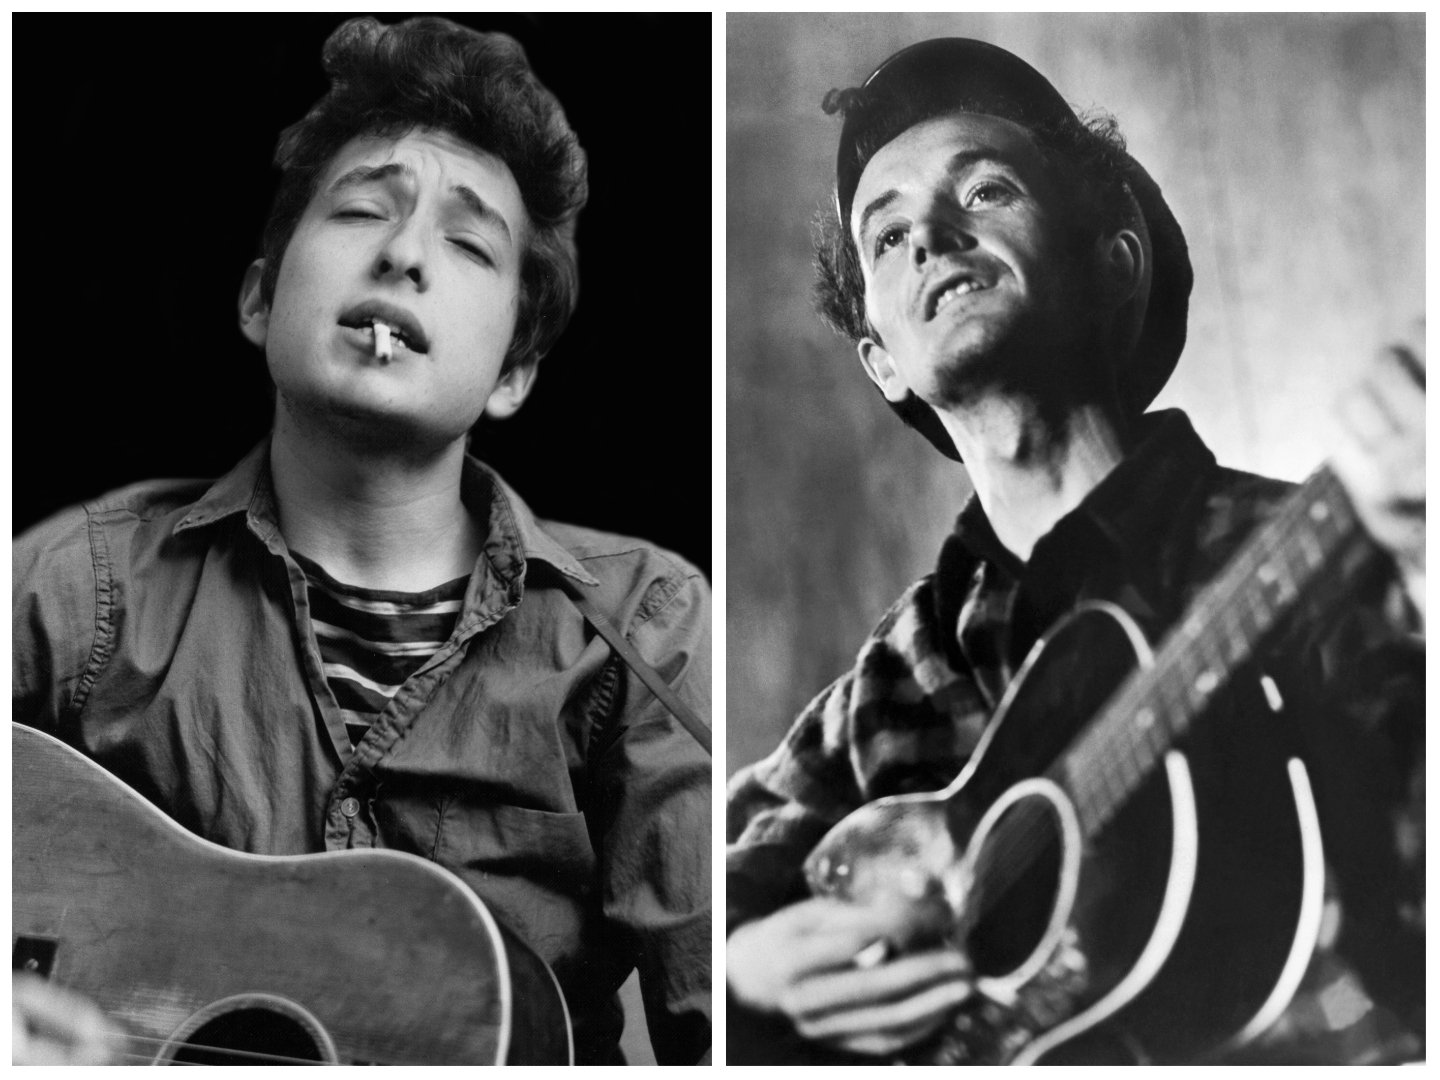 Bob Dylan Once Proved His Soul Connection to Woody Guthrie by Letting Him Light a Cigarette